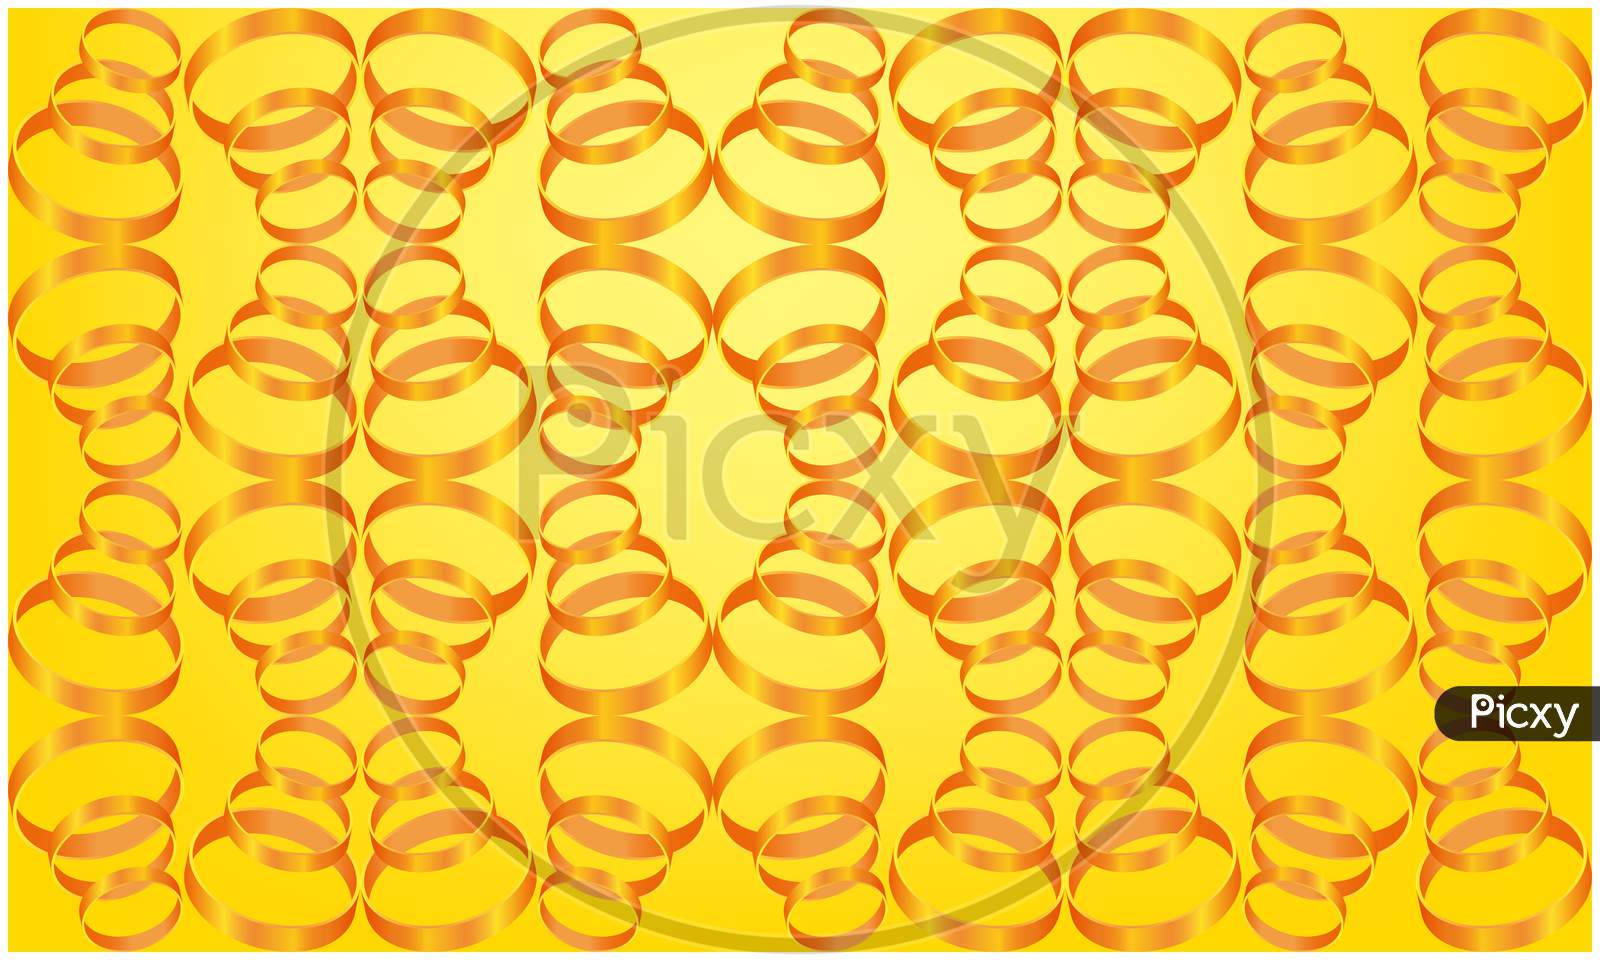 Digital Textile Design Of Rings On Abstract Background